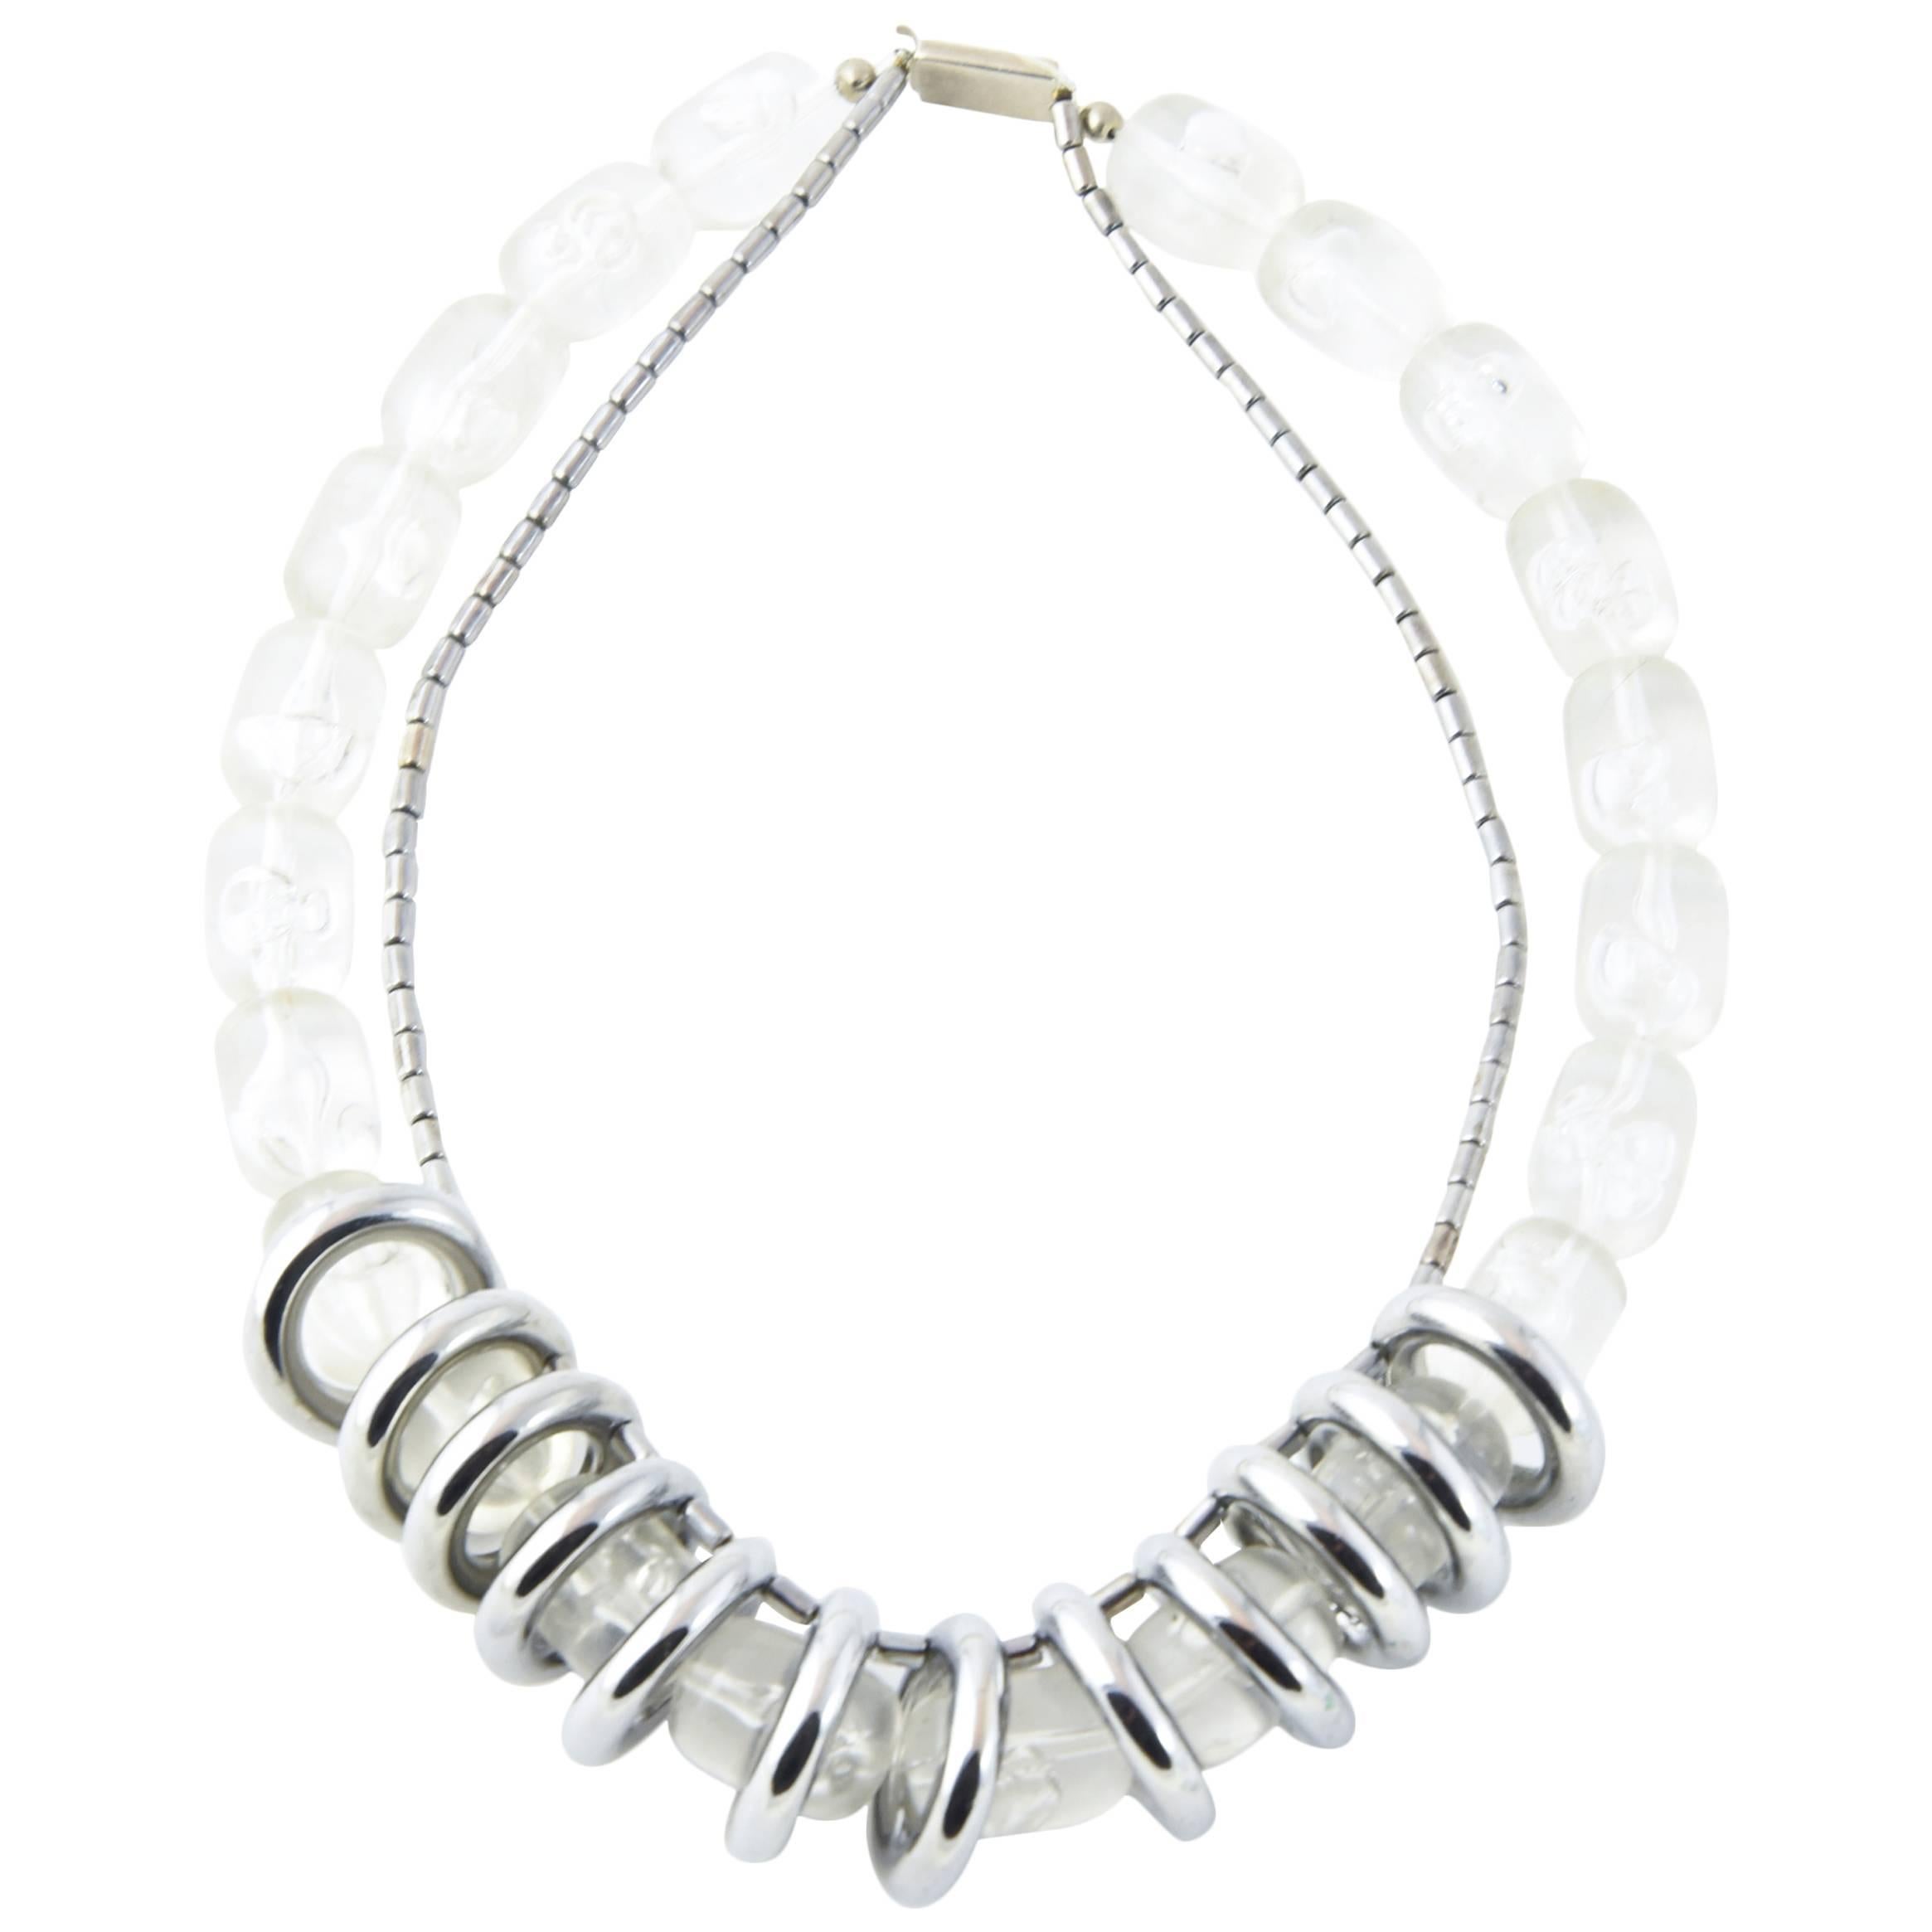 1970s Lucite and Chrome Statement Necklace